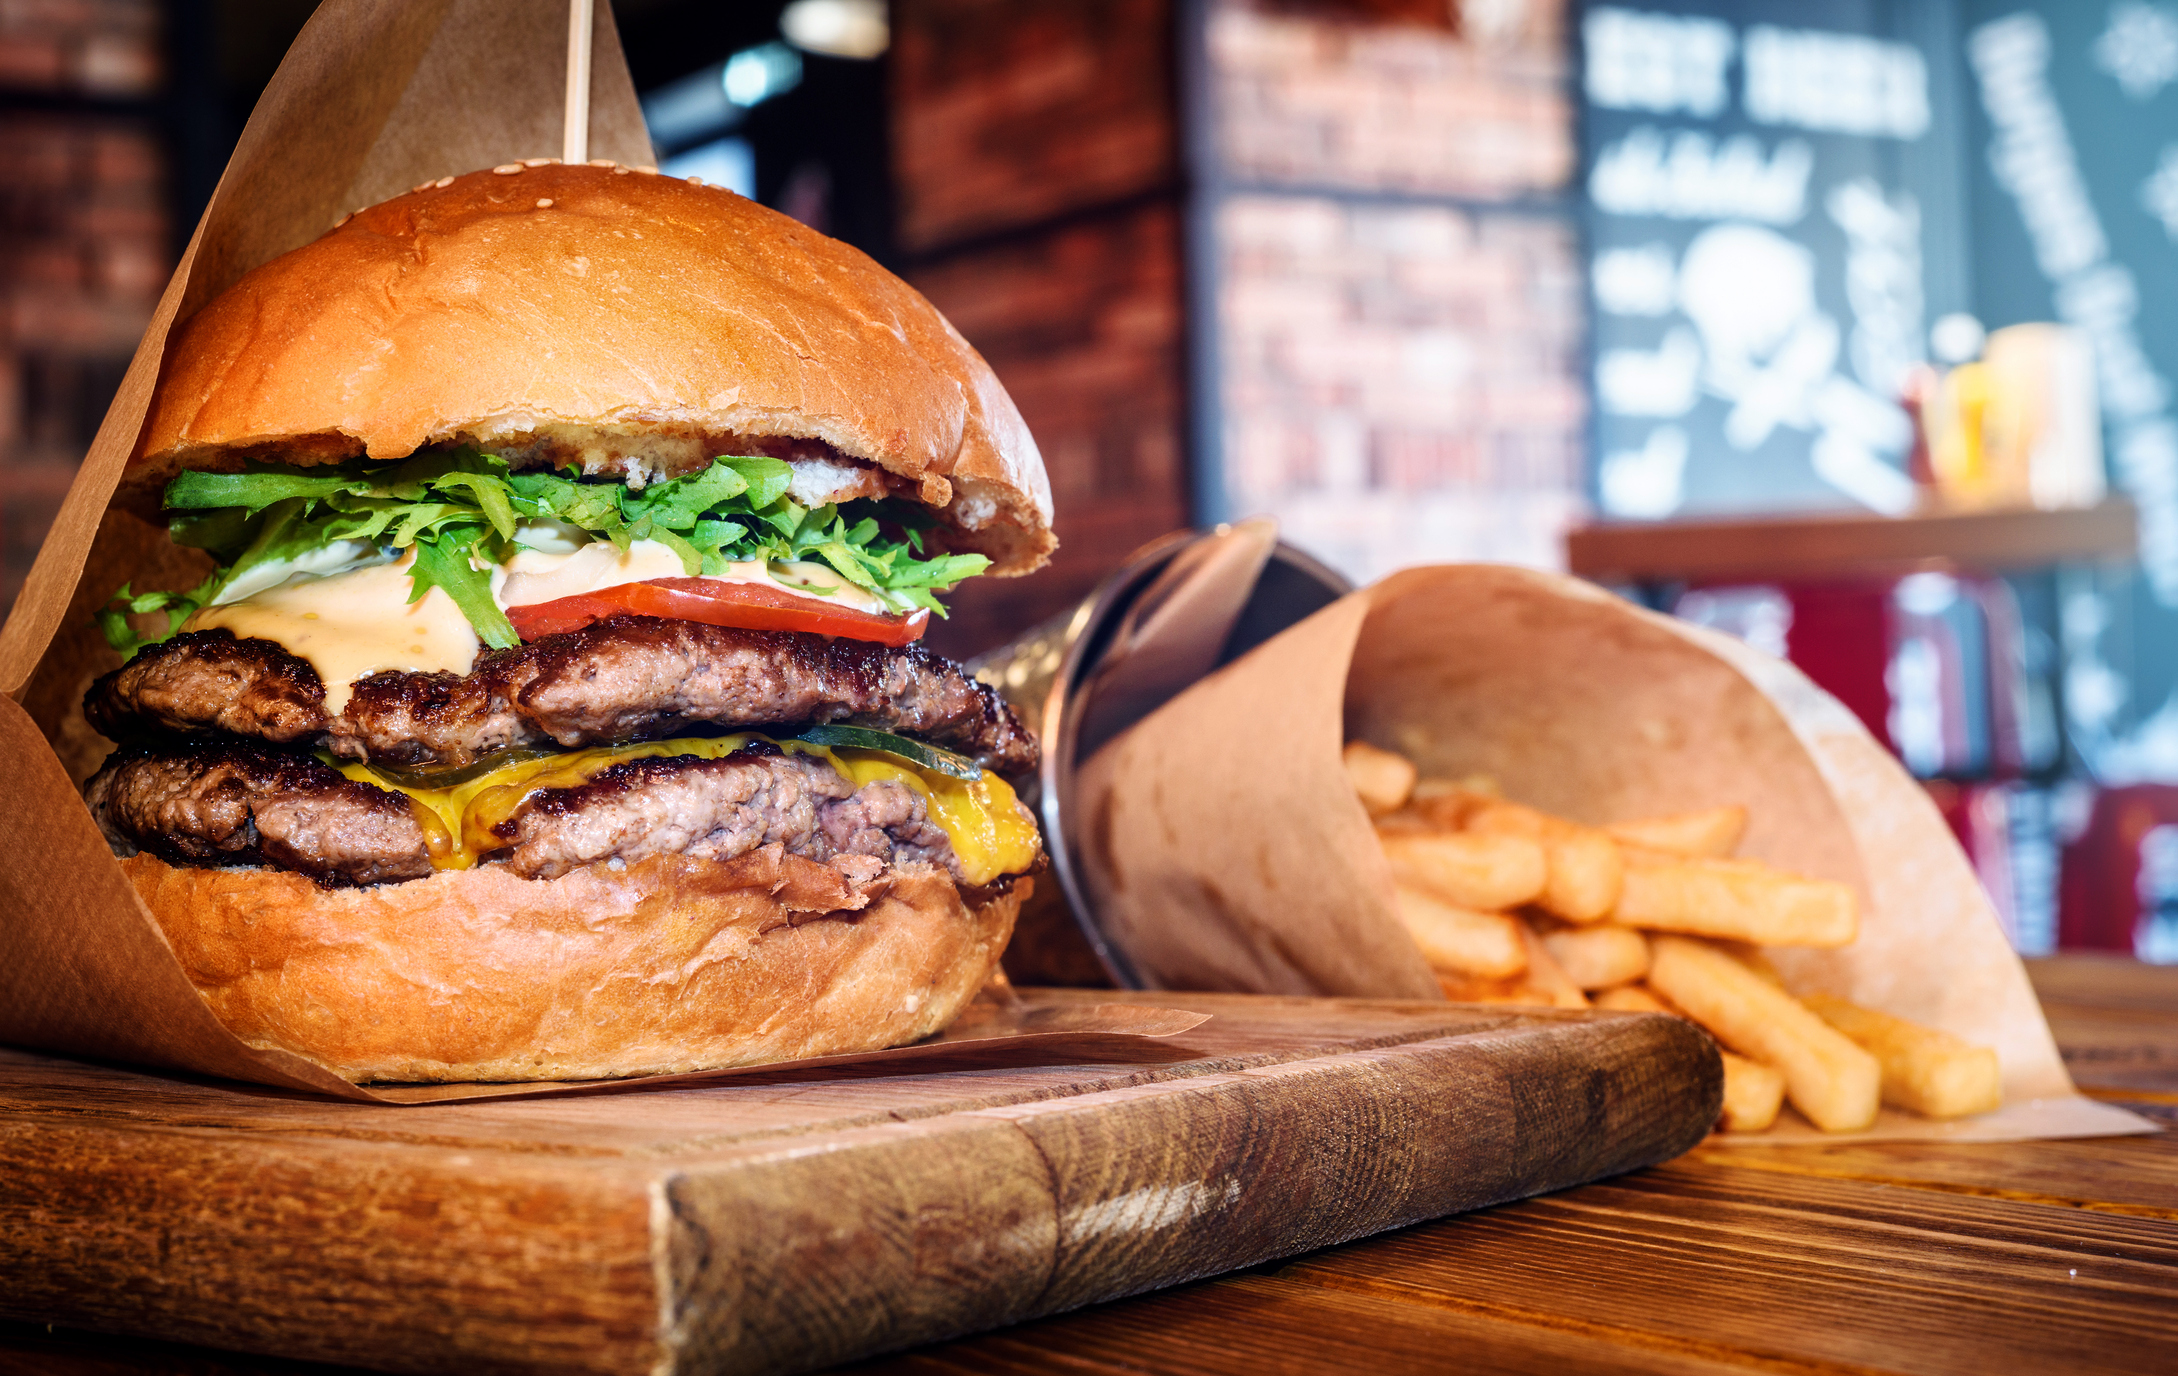 If you love burgers, you won’t want to miss this!